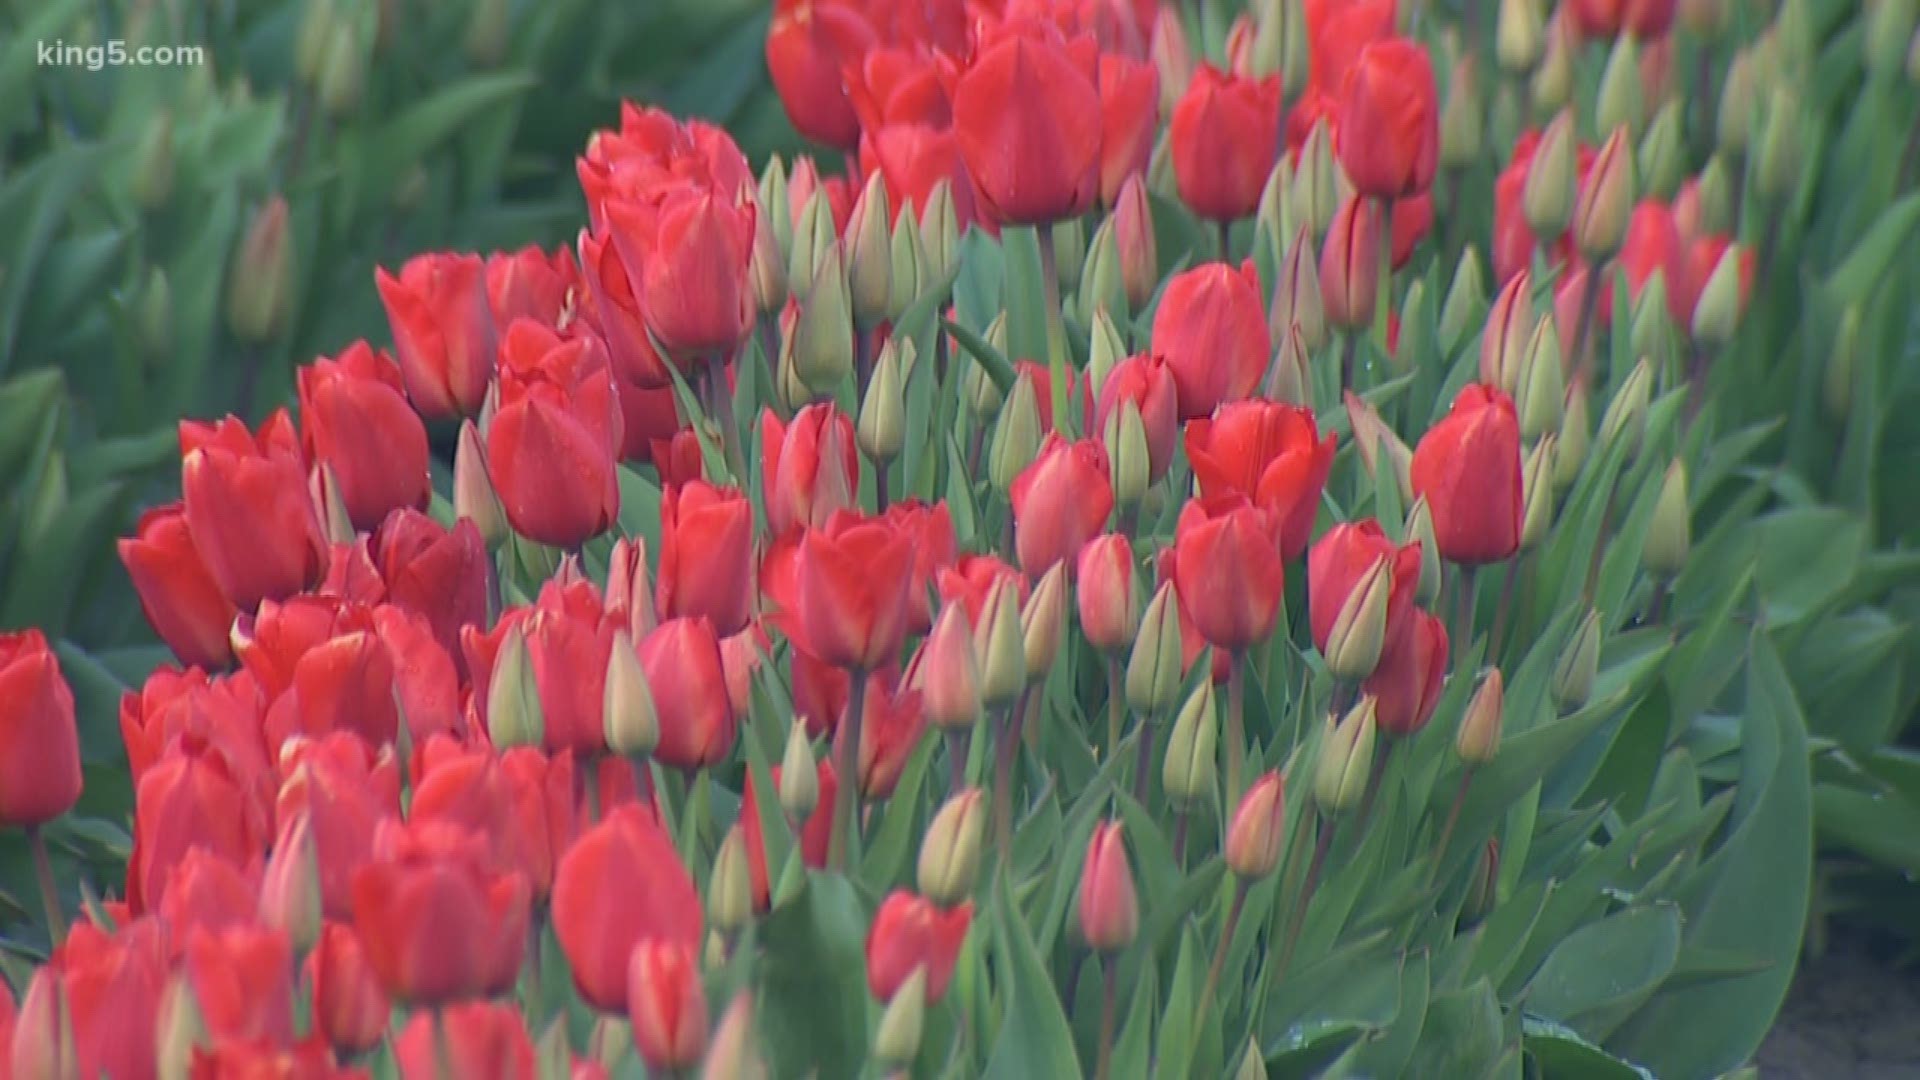 The opening of the Skagit Valley Tulip Festival was canceled after a statewide "stay home" order, which was mandated as a measure against the spread of coronavirus.